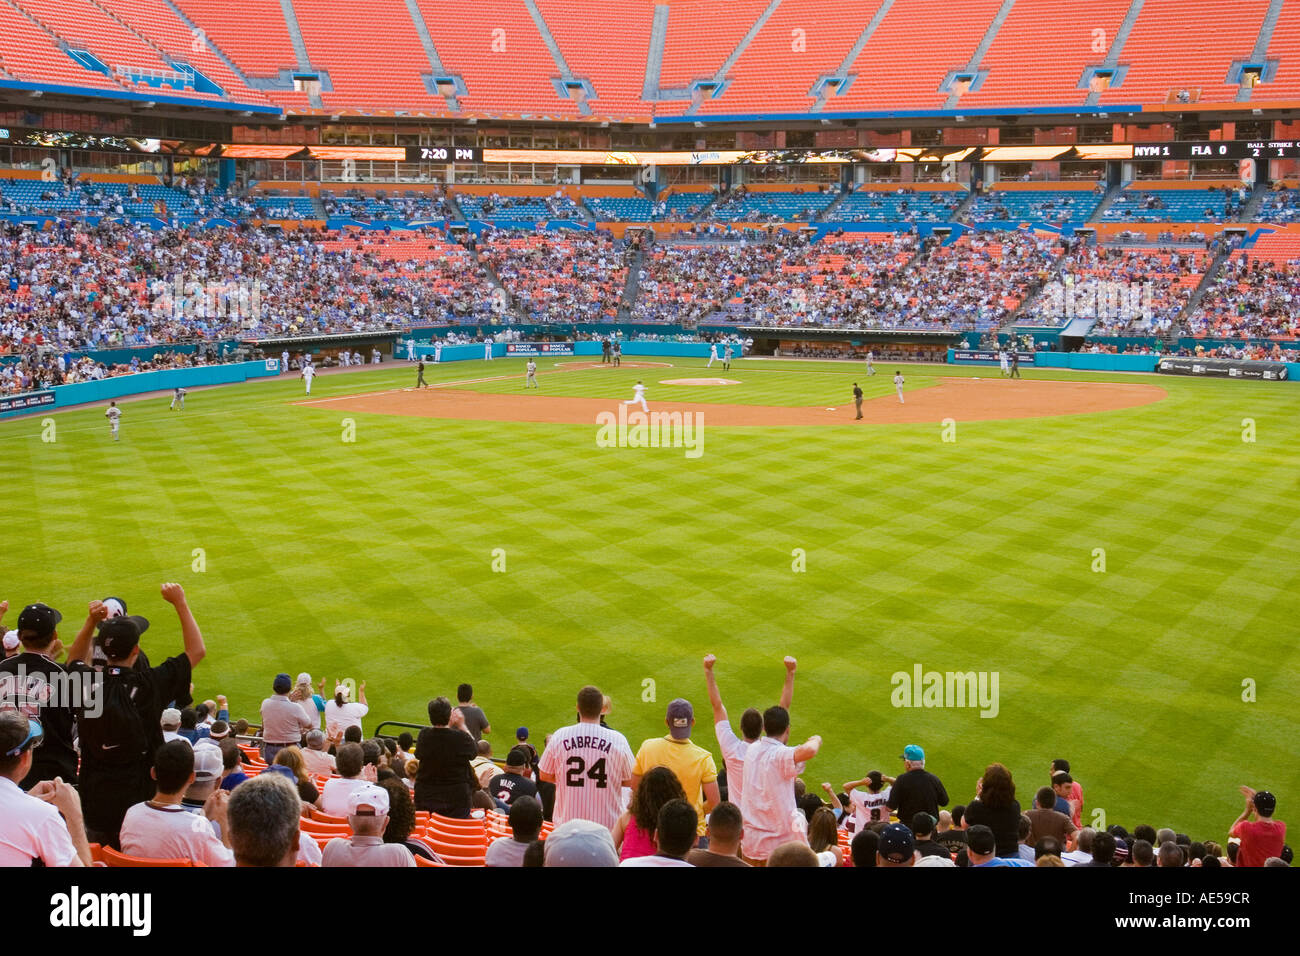 Miami marlins stadium hi-res stock photography and images - Alamy